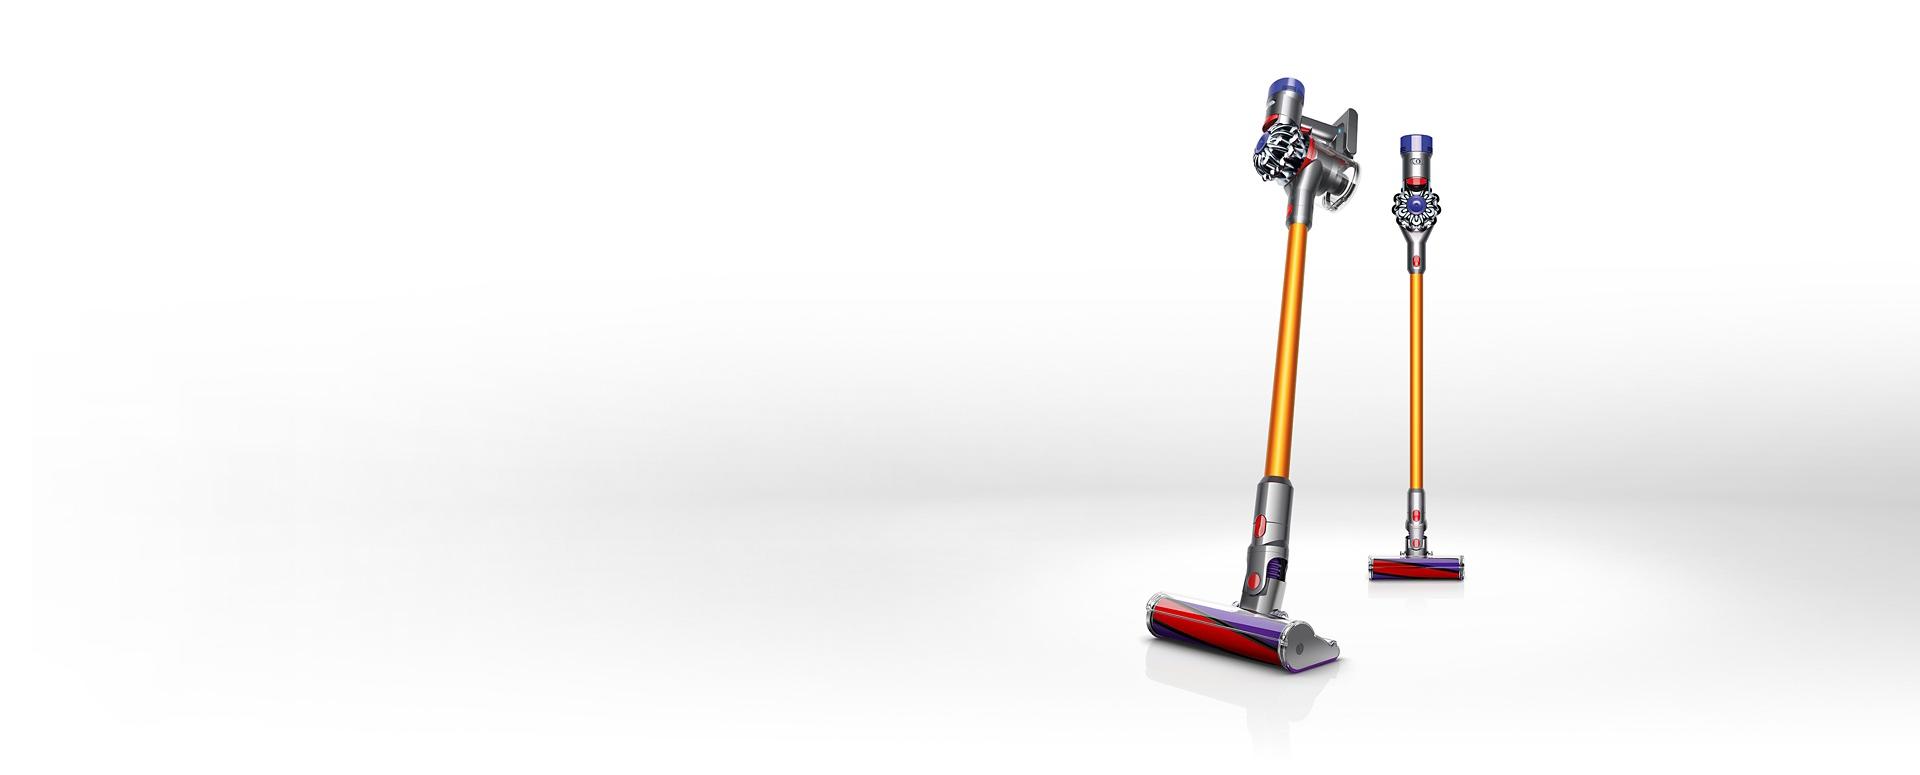 Dyson V8 vacuum cleaner picking up debris from the hard floor